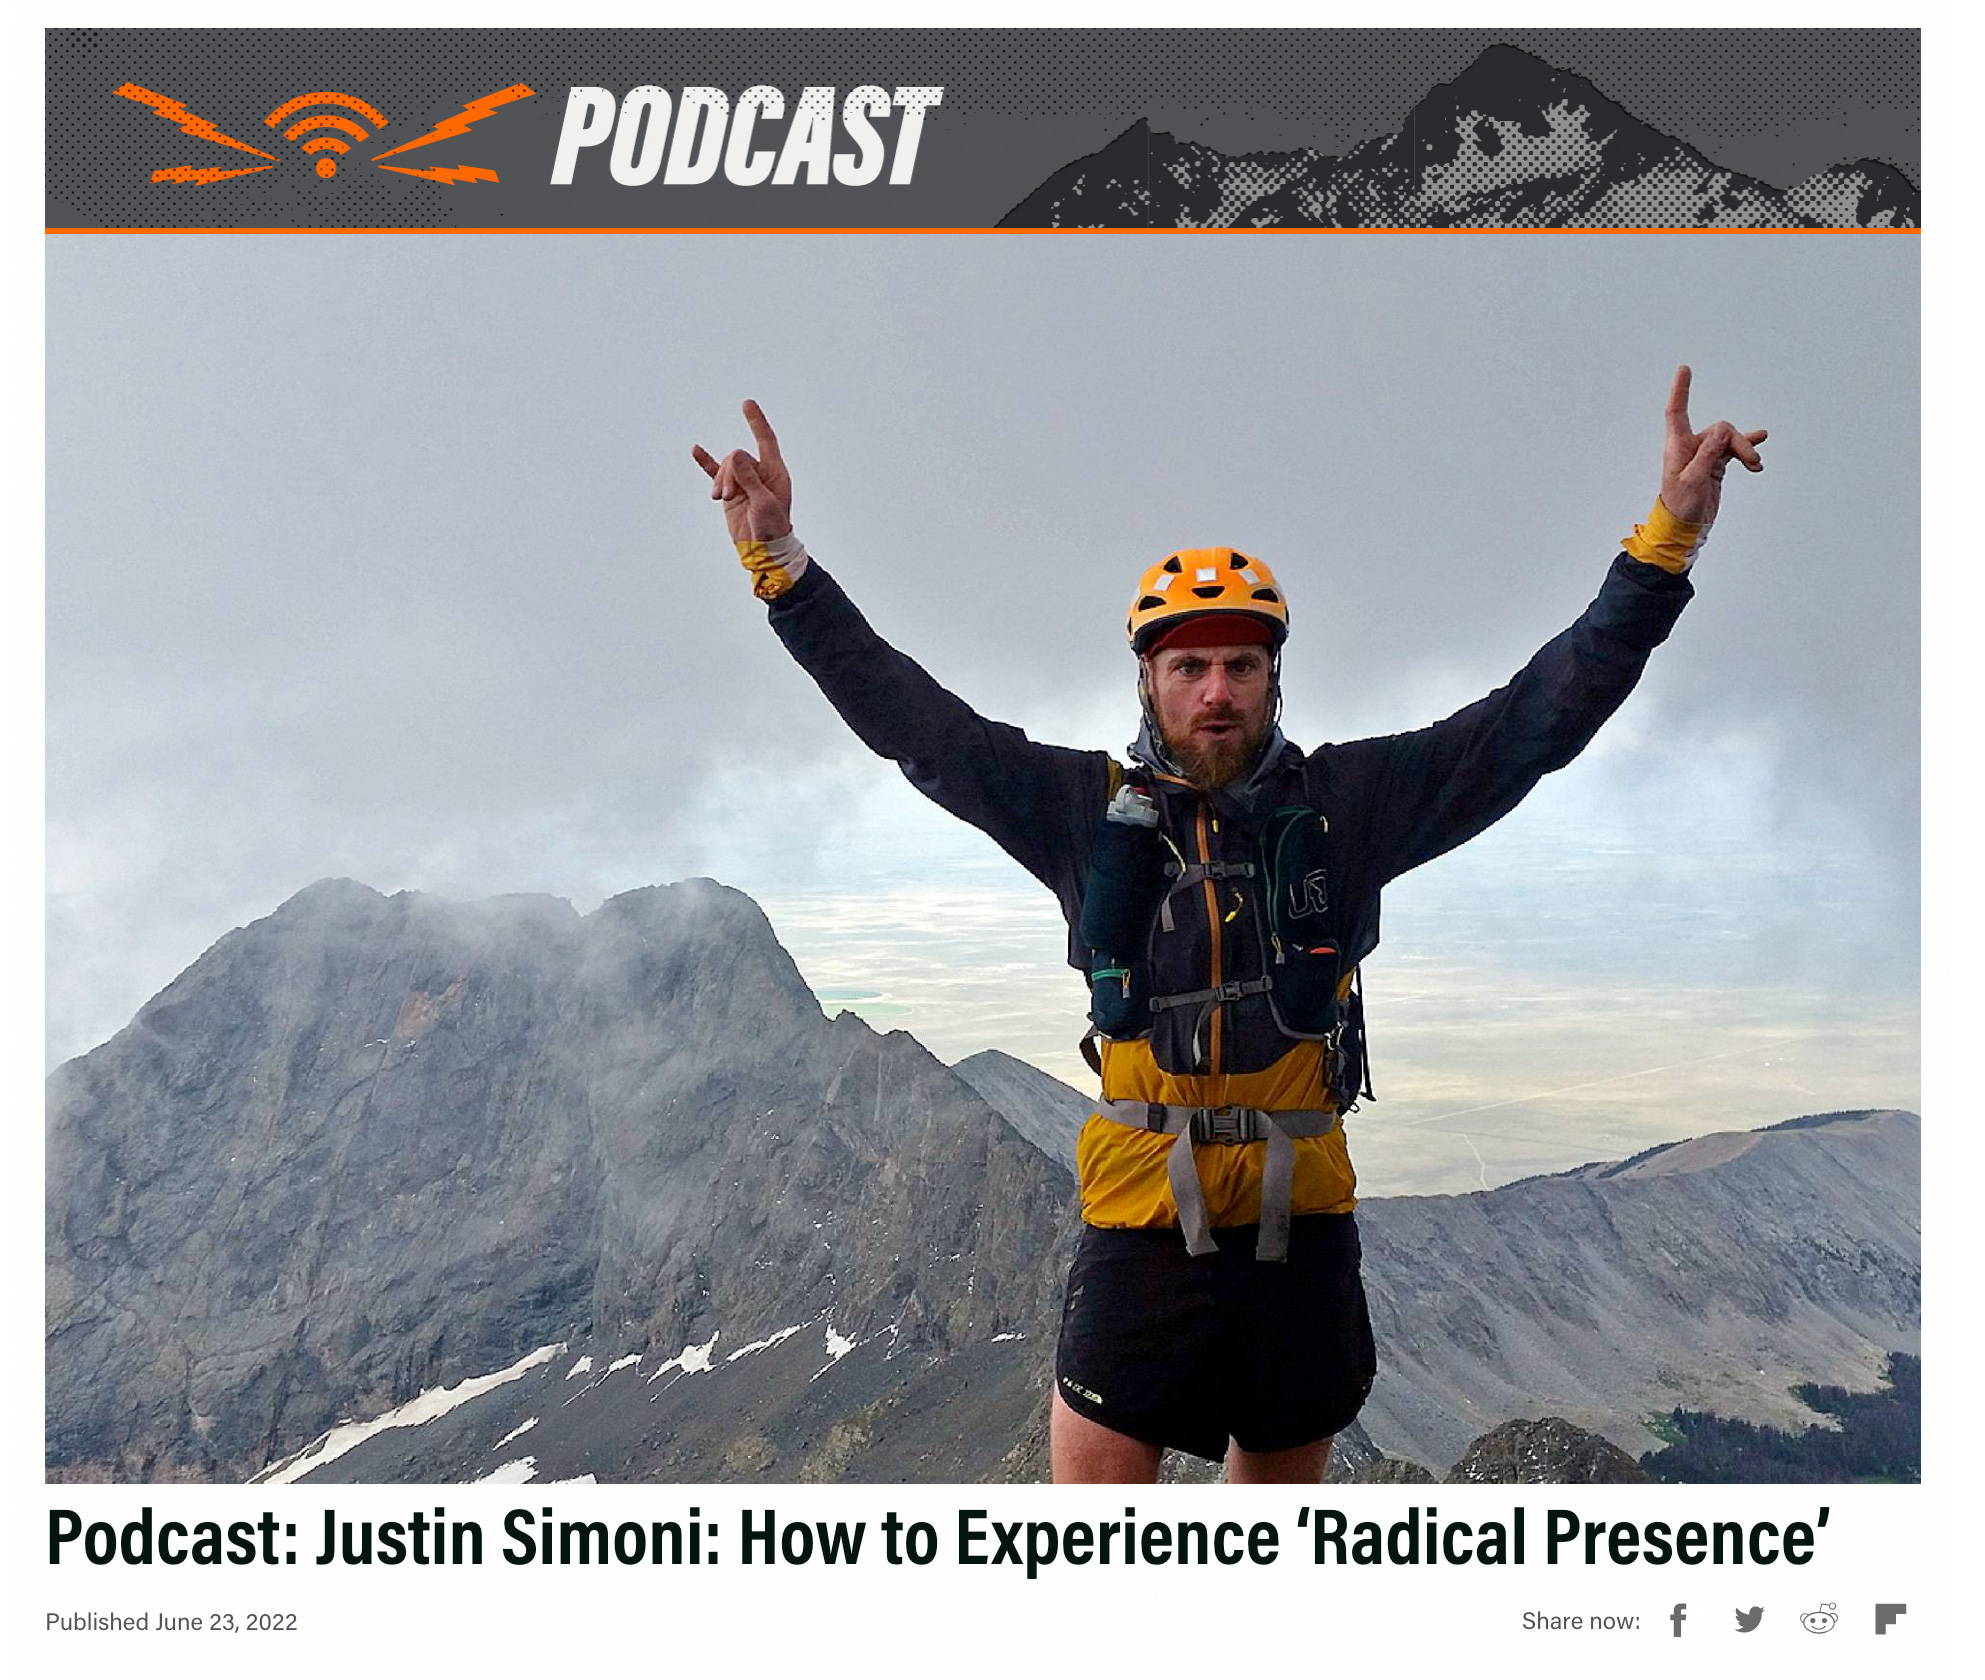 Click to Listen to, Podcast: Justin Simoni: How to Experience ‘Radical Presence’